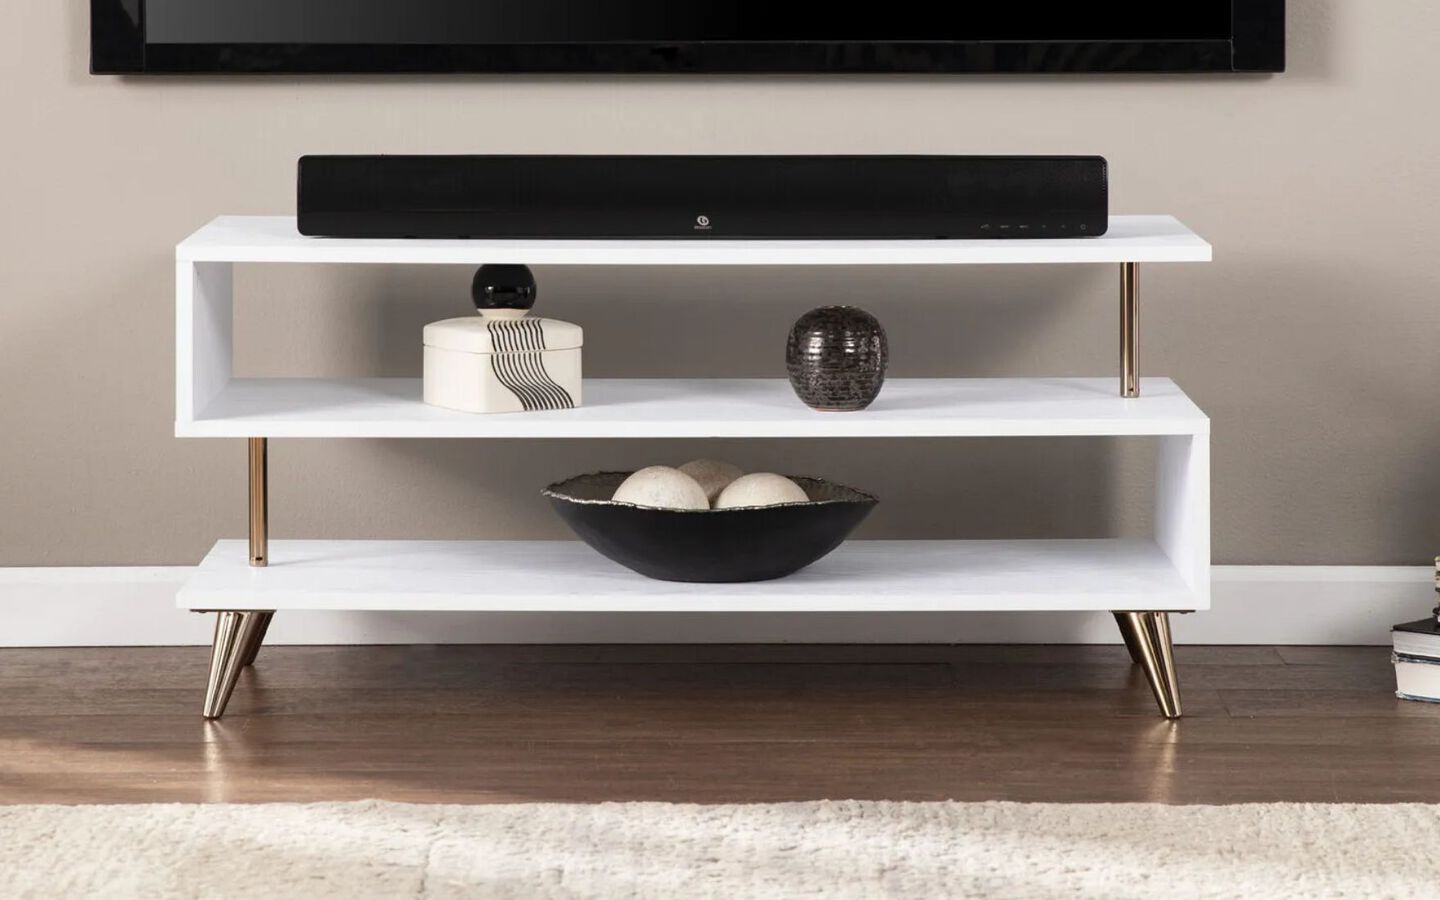 White geometric TV stand with bowl and small objects on the shelves